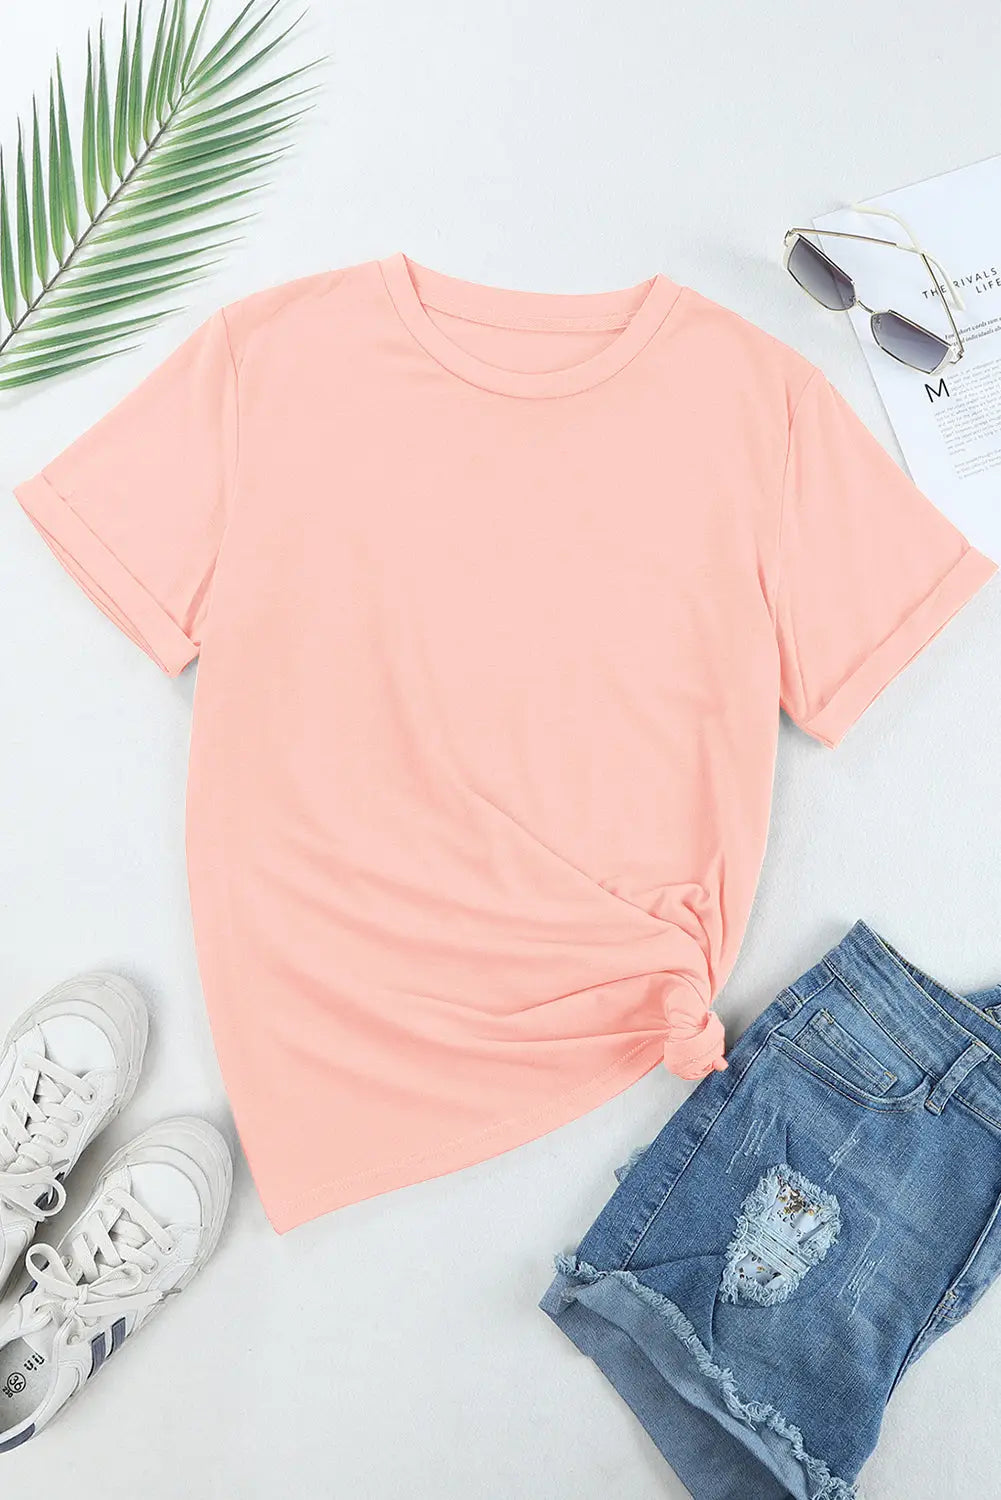 Red casual plain crew neck tee - t-shirts